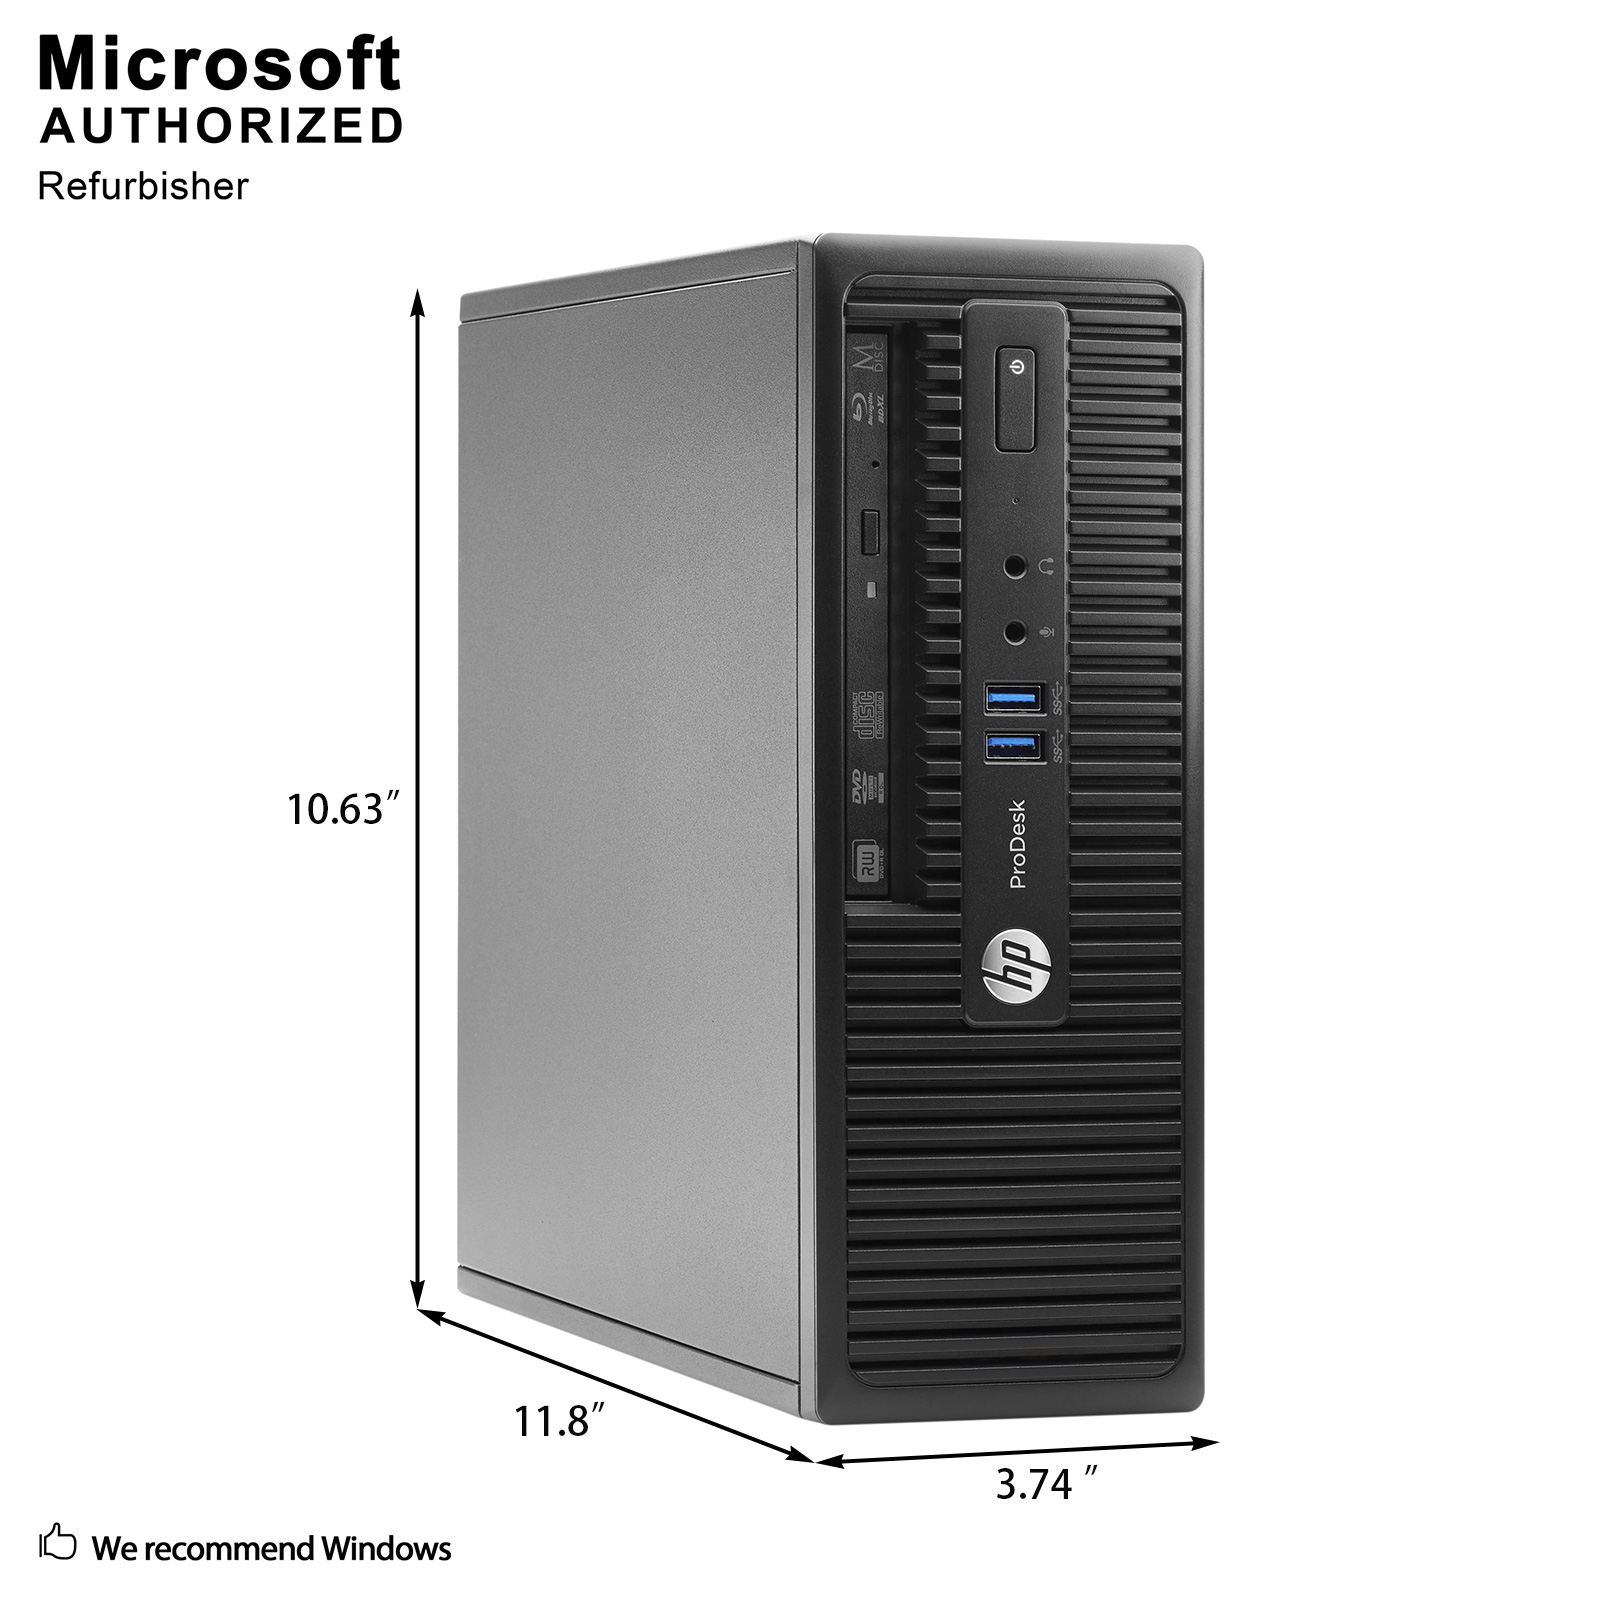 HP ProDesk 400 G2.5 SFF Business Desktop Computer PC, Intel Quad Core i5-4590S up to 3.7GHz, 16G DDR3, 512G SSD, DVDRW, WiFi, BT, 4K Support, DP, VGA, Window 10 Pro 64 En/Sp/Fr Used Grade A - image 2 of 5